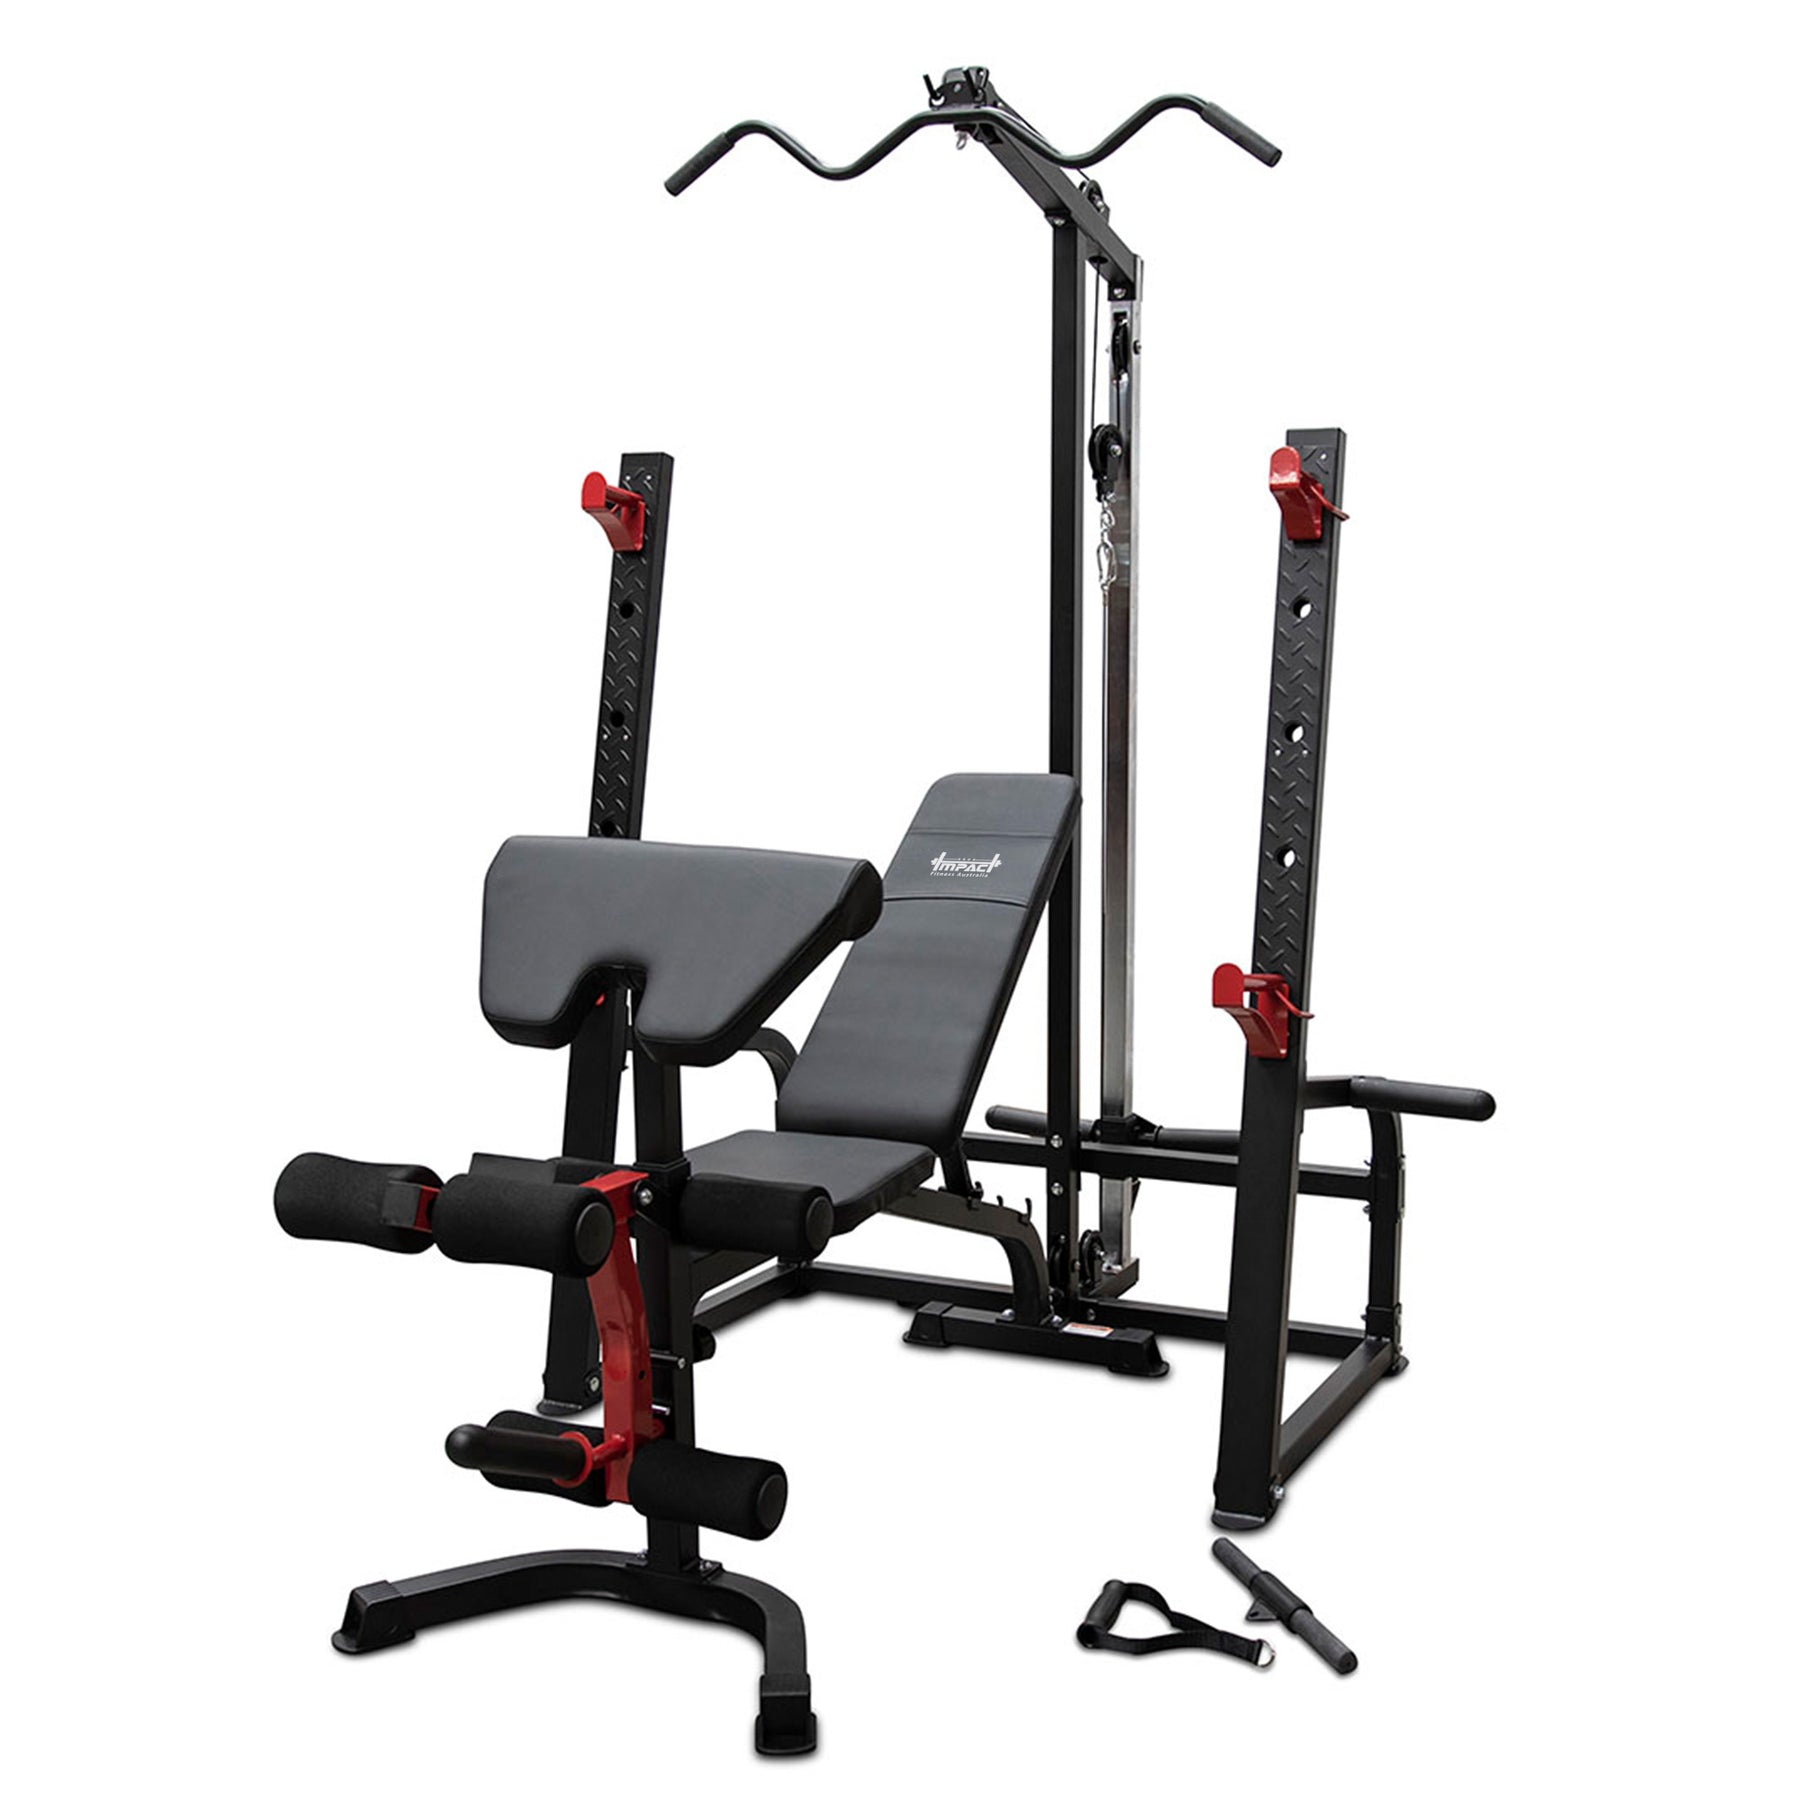 Impact Fitness Squat Rack Lat Pulldown + Adjustable Bench + 120kg Olympic Barbell Weight Set